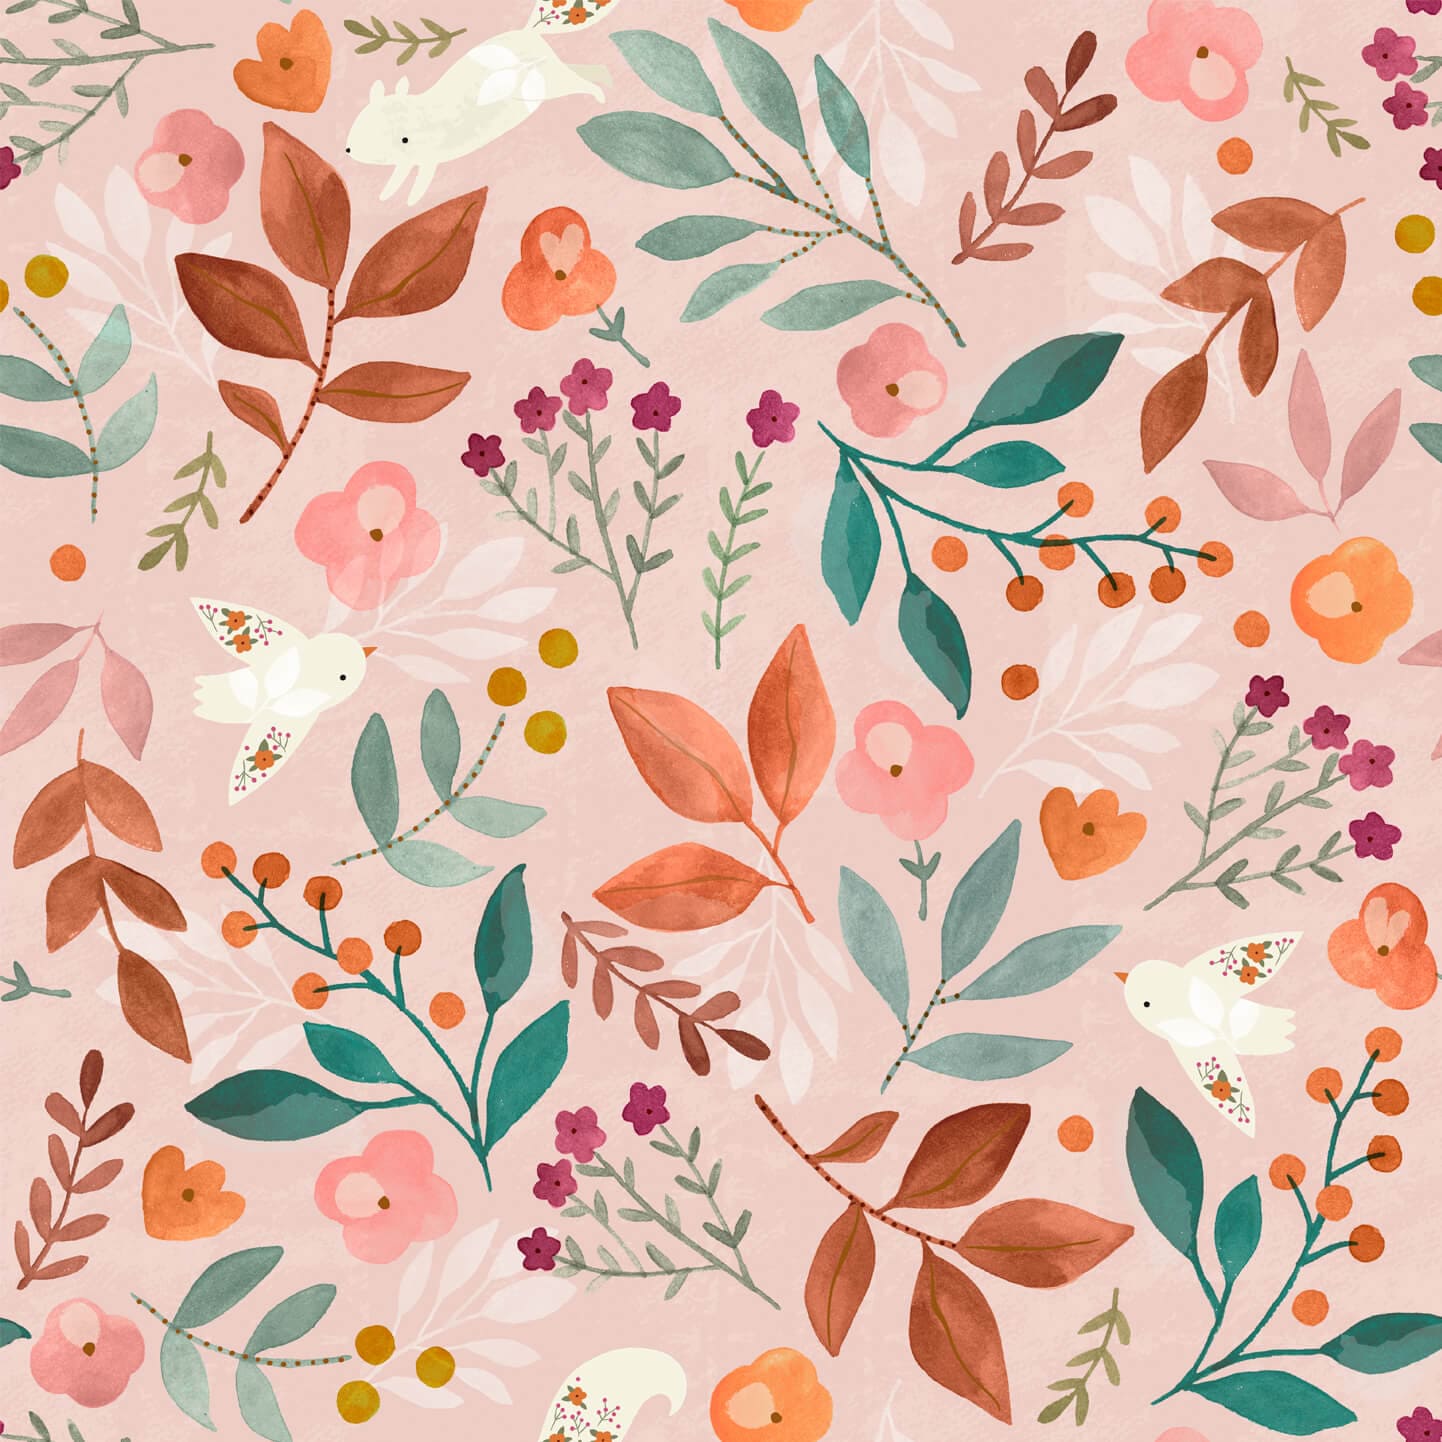 Wallpaper of vintage pink background with cream birds and squirrels with floral detailing. vintage pink and orange flowers with green leaves.